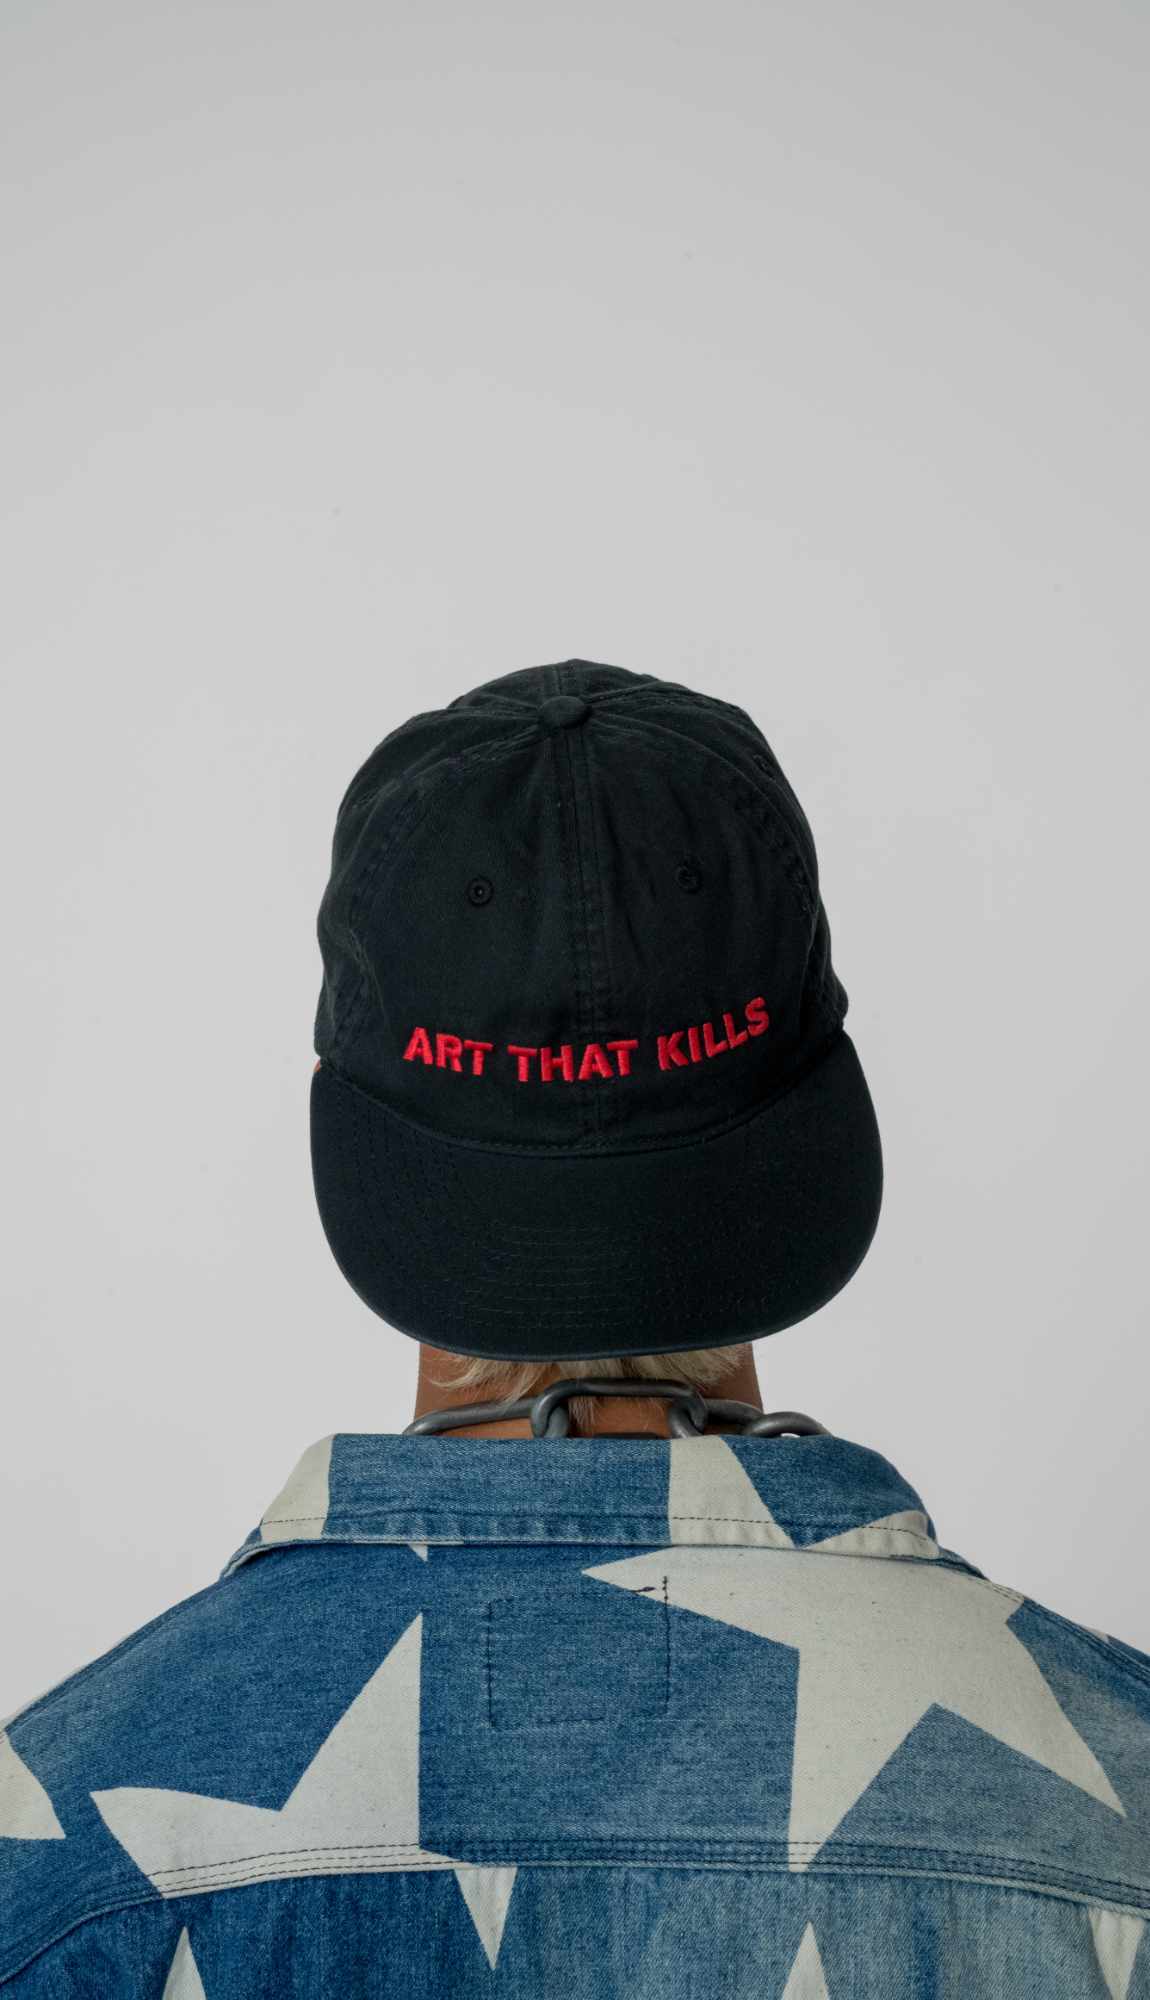 Gallery Dept. founder Josue Thomas debuts Art That Kills with stylized lookbook, editorial & merch